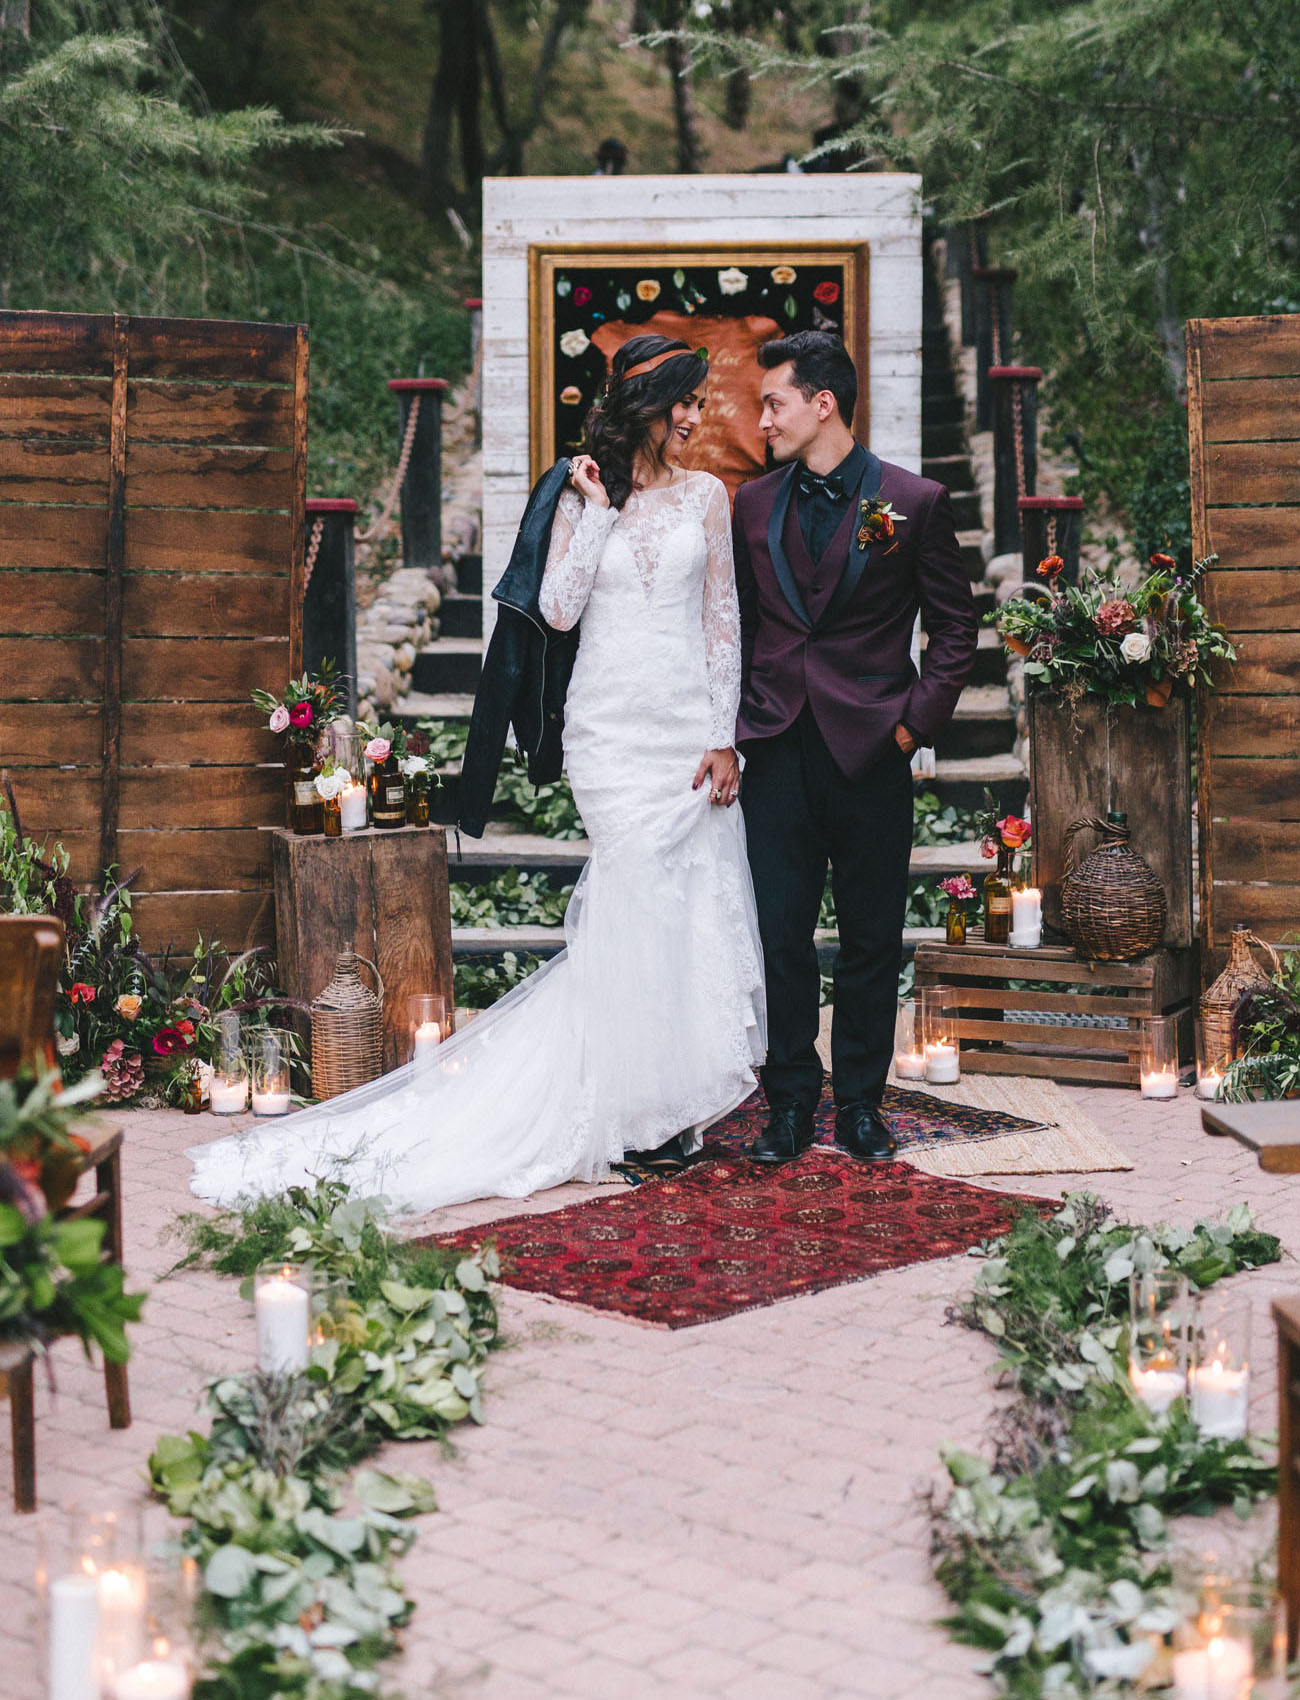 The groom was rocking a burgundy suit with black, the bride was wearing a lace wedding dress with an illusion neckline and long sleeves